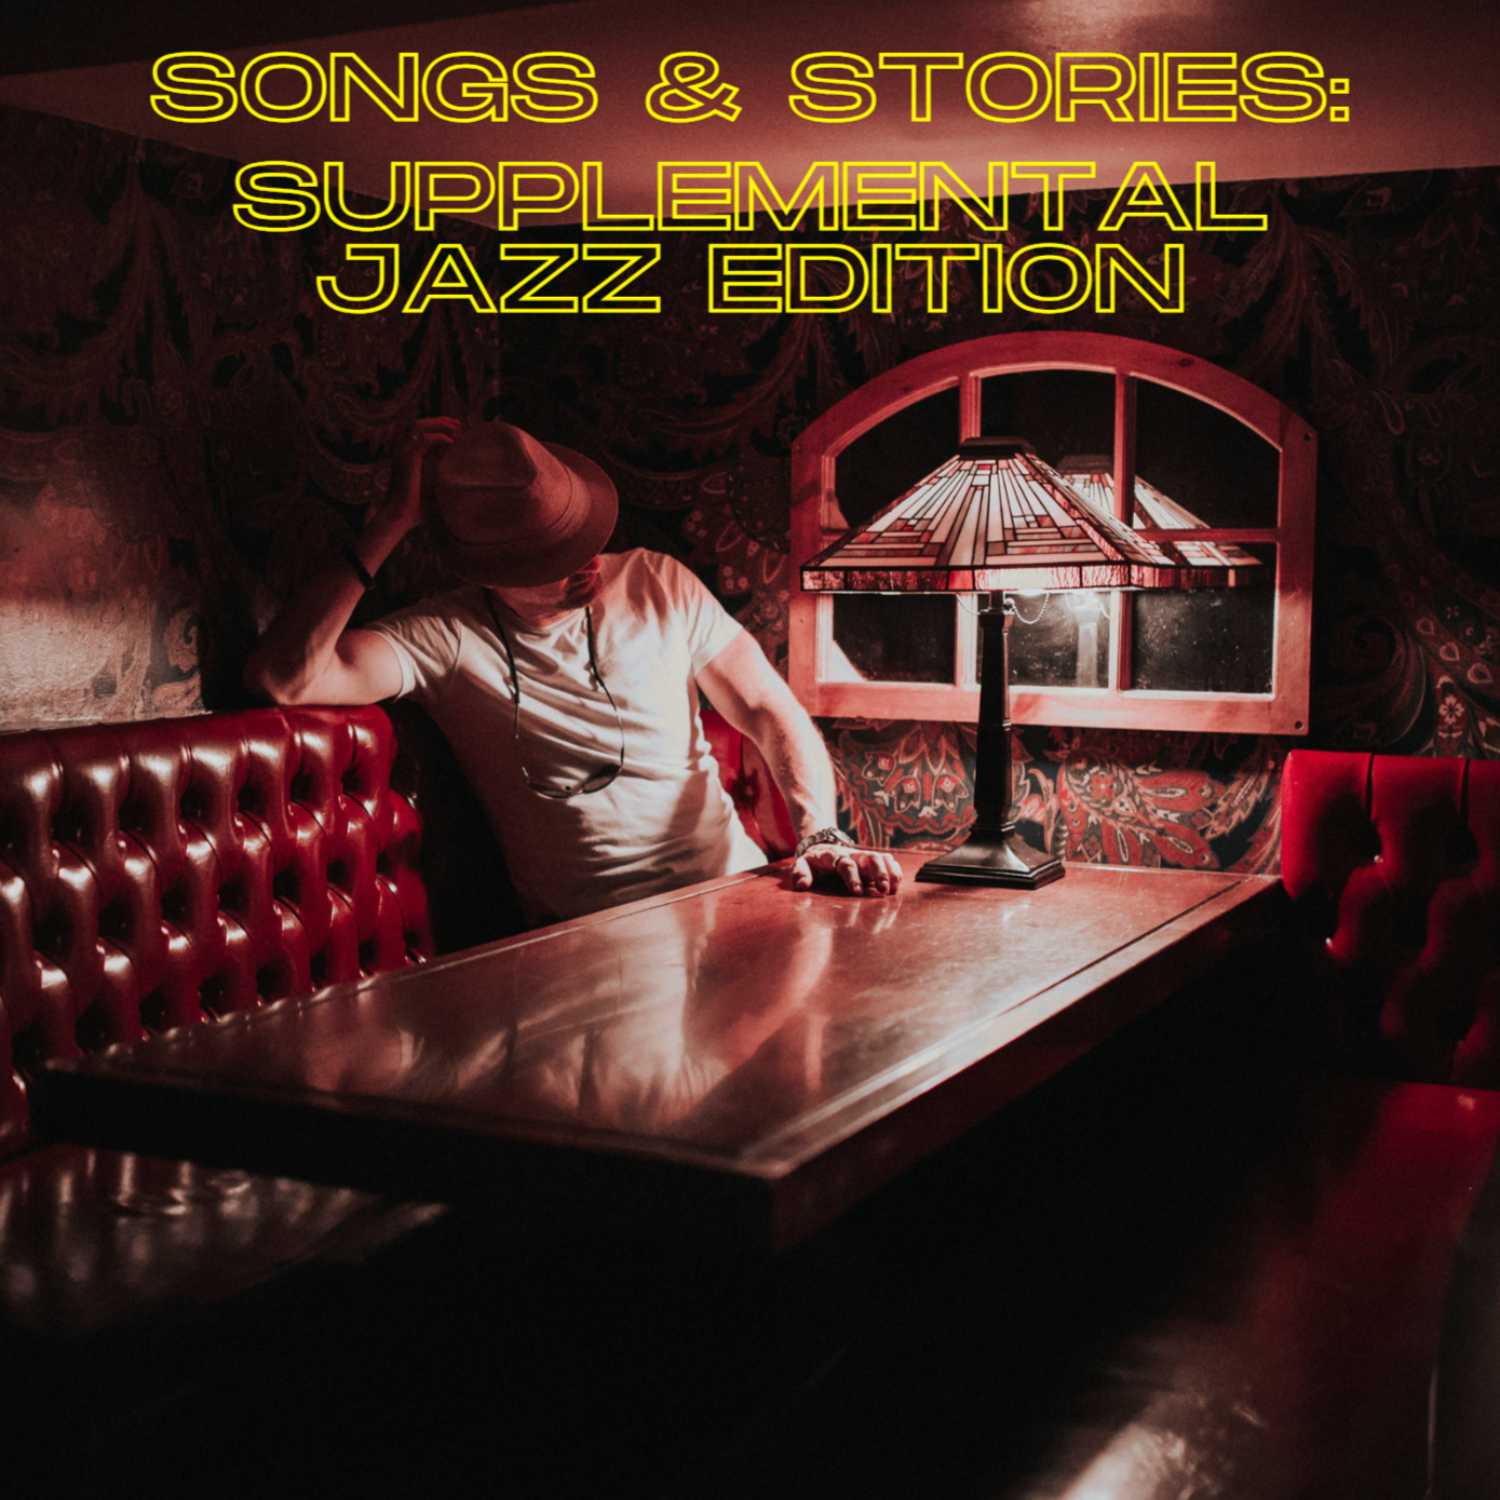 Songs & Stories: Supplemental Jazz Edition